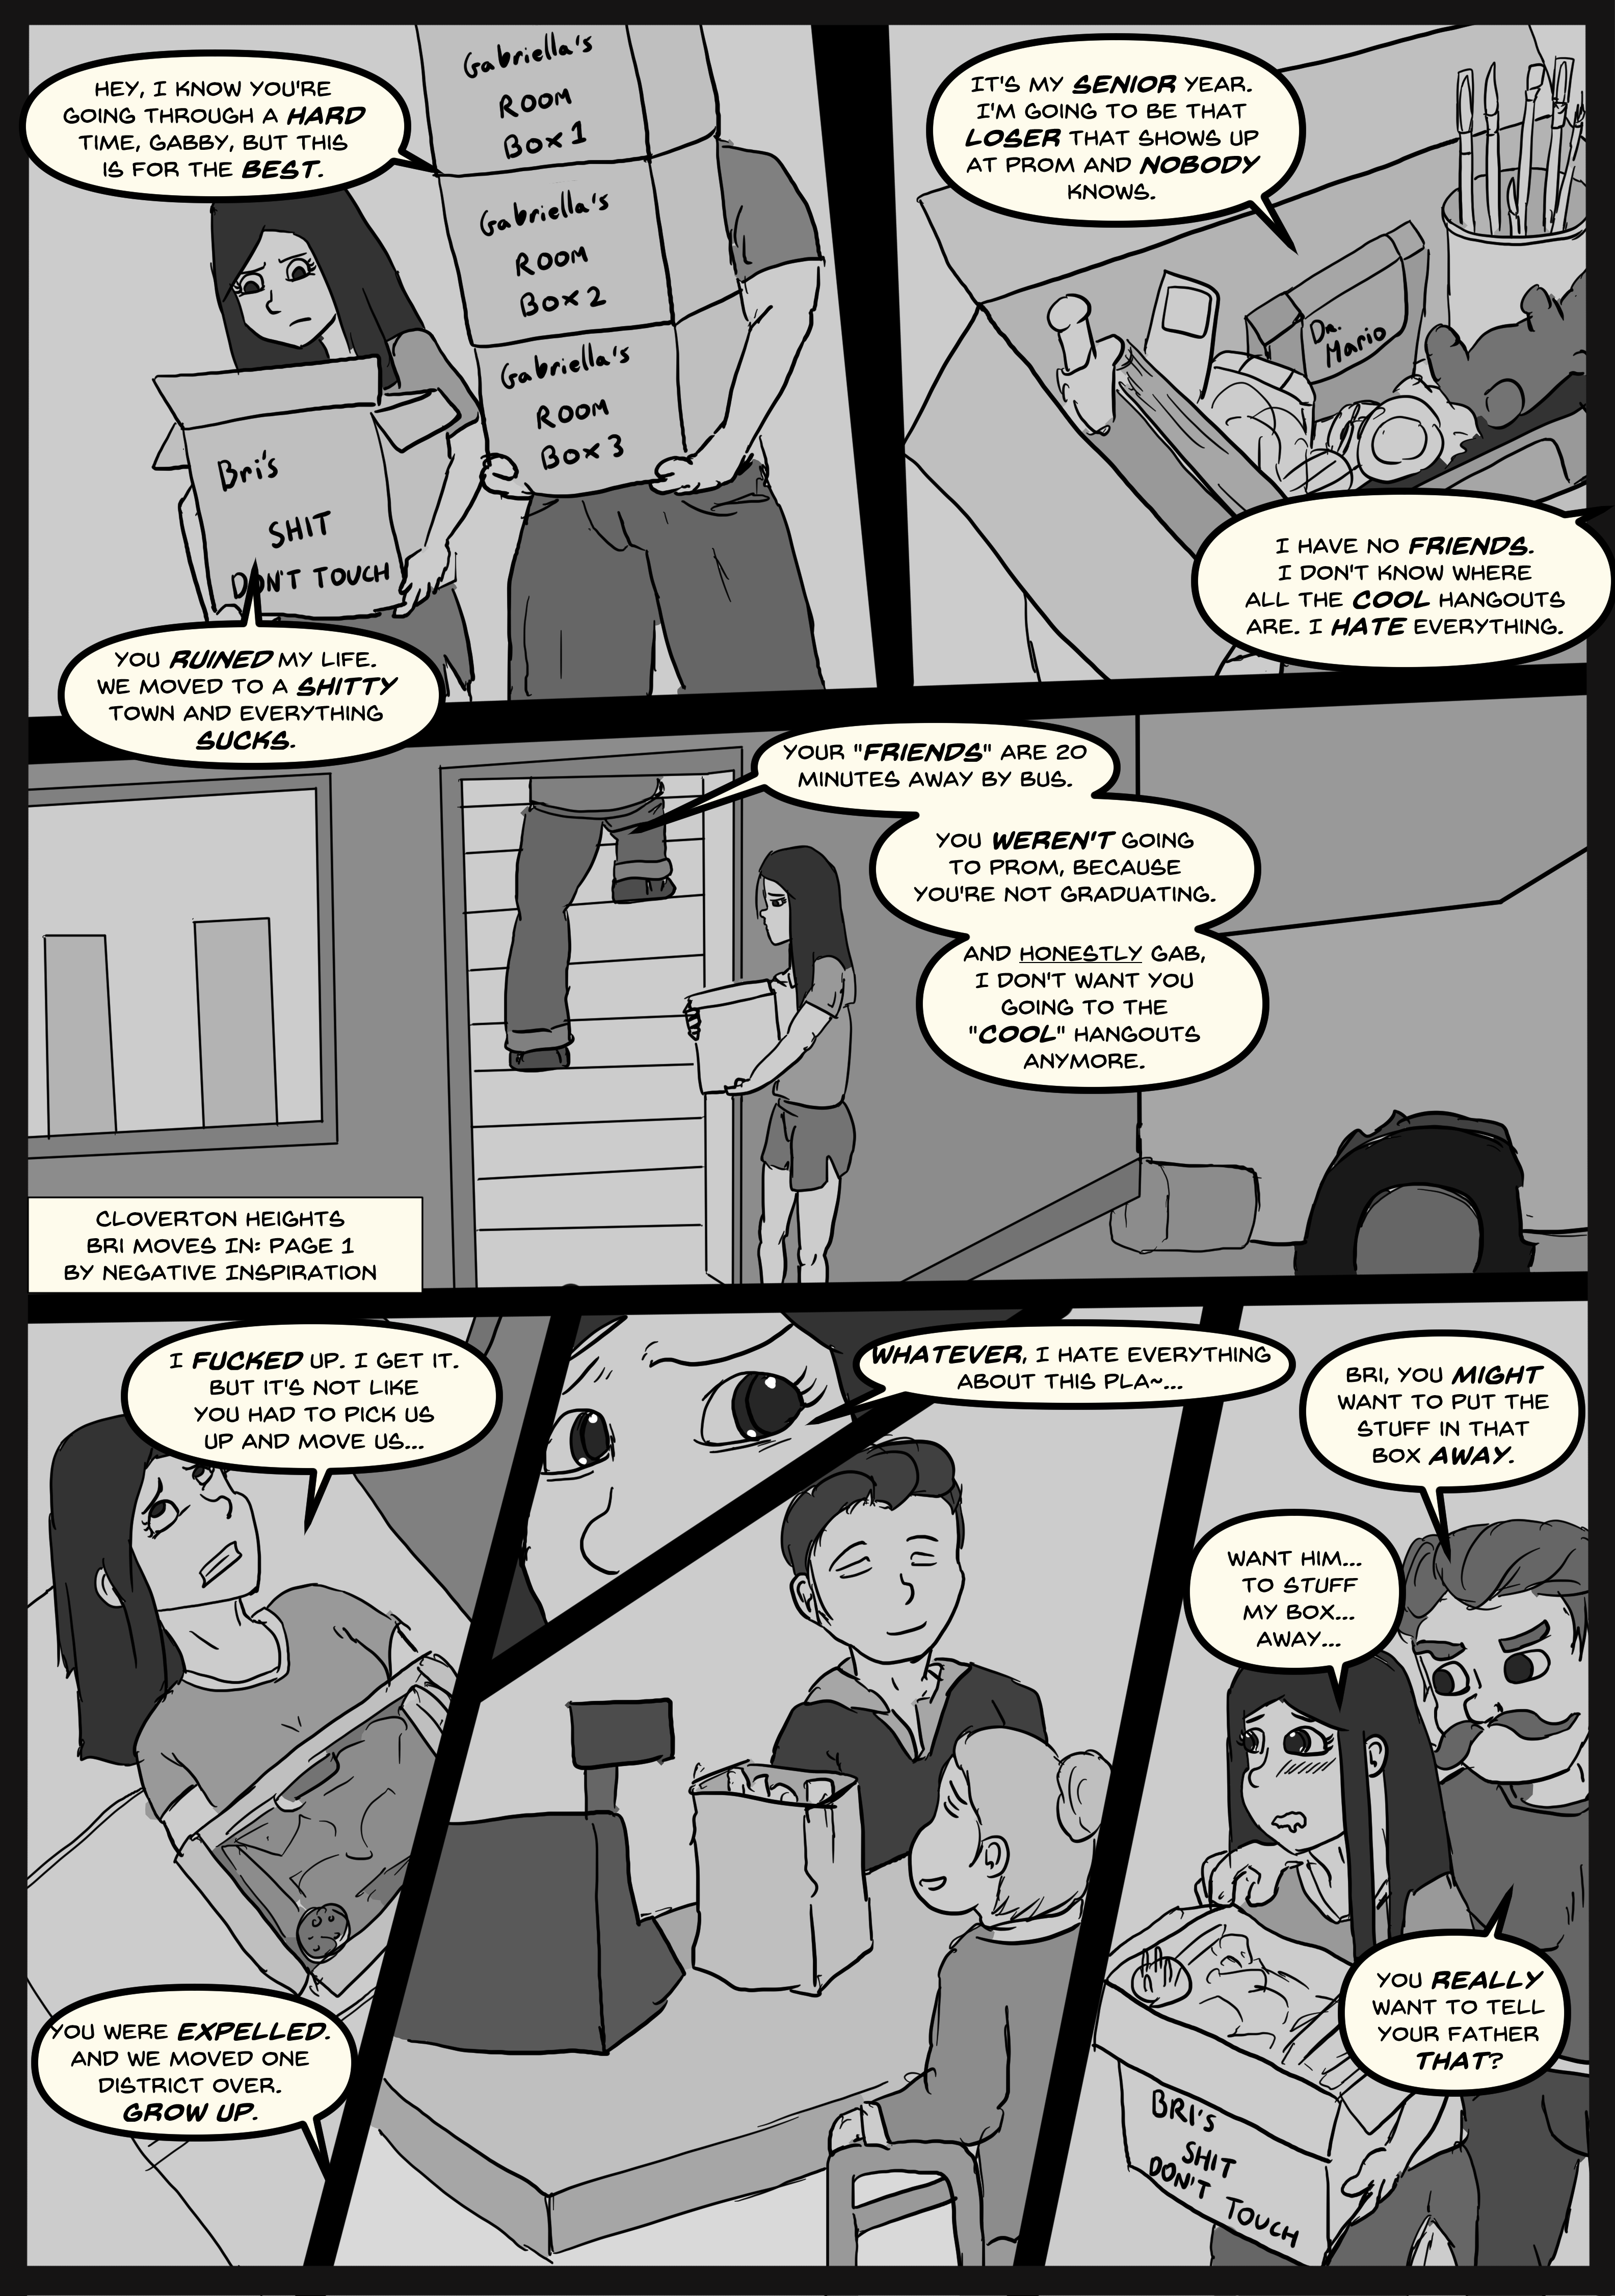 Cloverton Heights: Chapter 1, Page 1